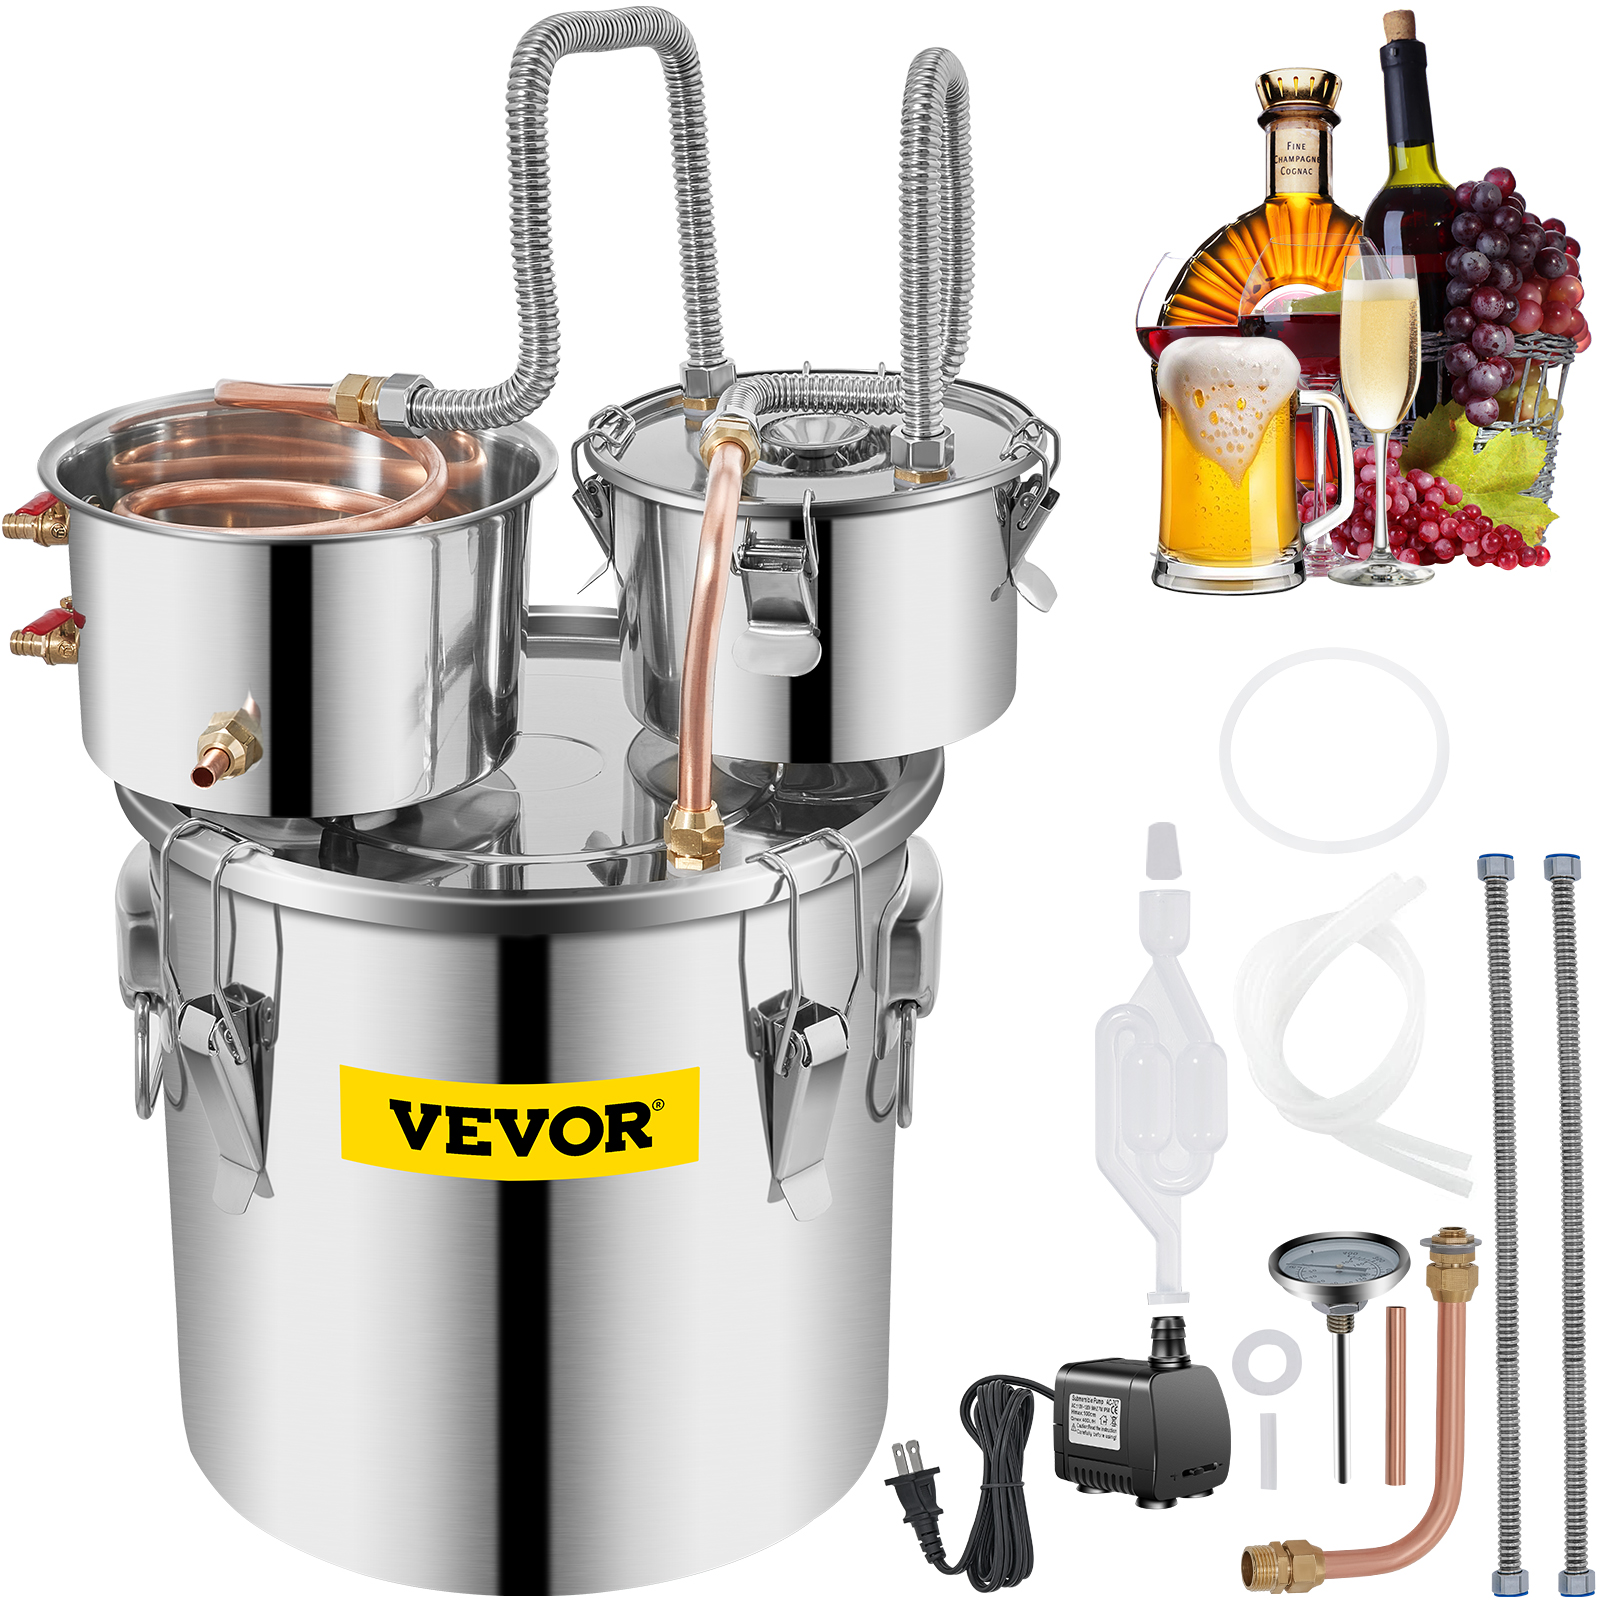 VEVOR Alcohol Still 5 Gal 19L Water Alcohol Distiller Copper Tube With Circulating Pump Home Brewing Kit Build-in Thermometer от Vevor Many GEOs